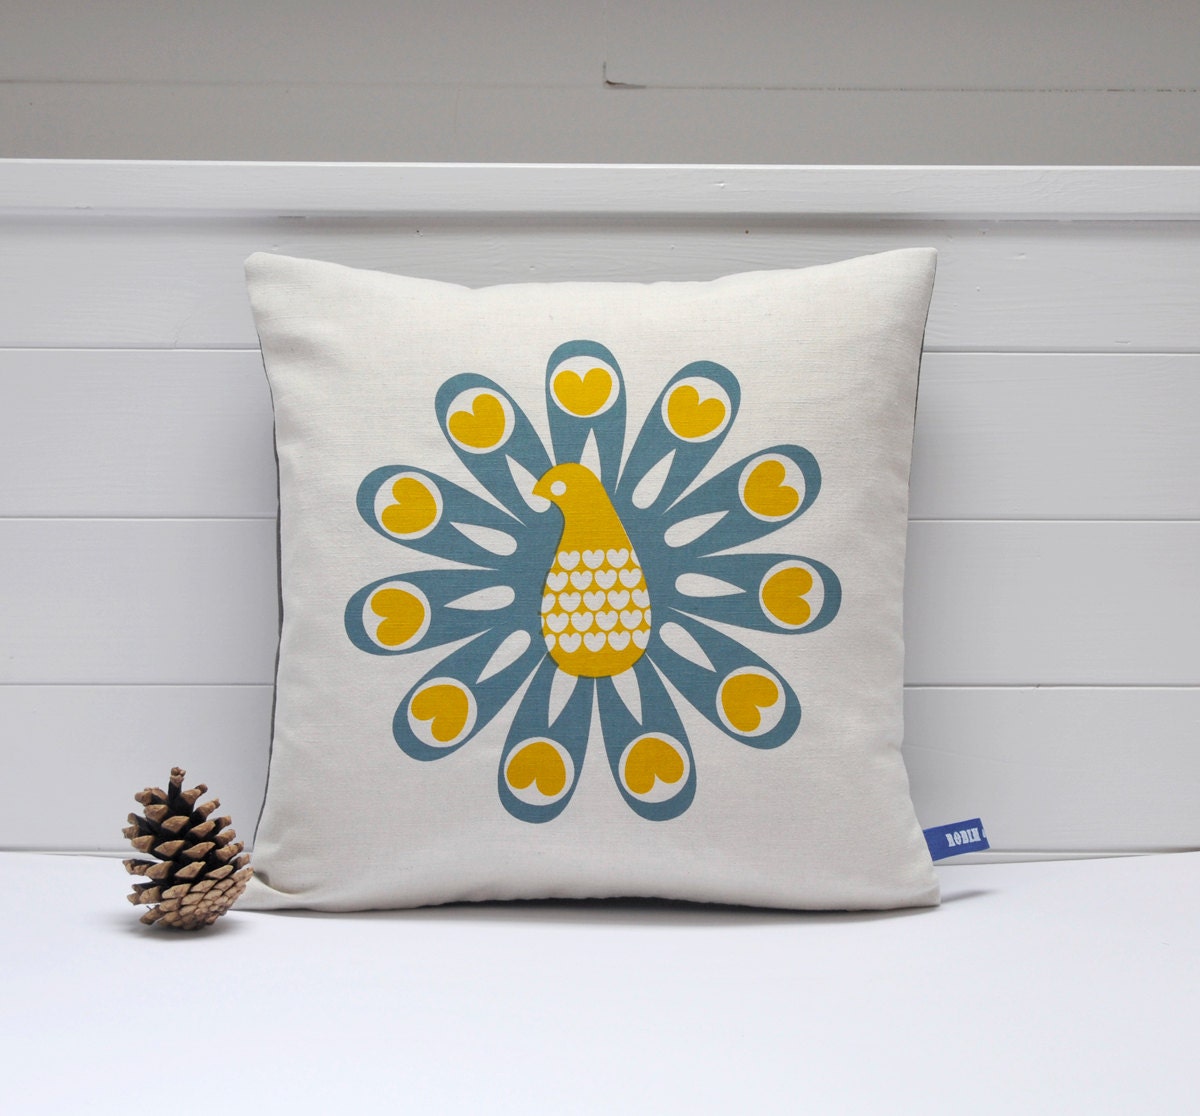 Hand Screen Printed Peacock Cushion Cover in Grey Blue & Mustard Yellow - robinandmould